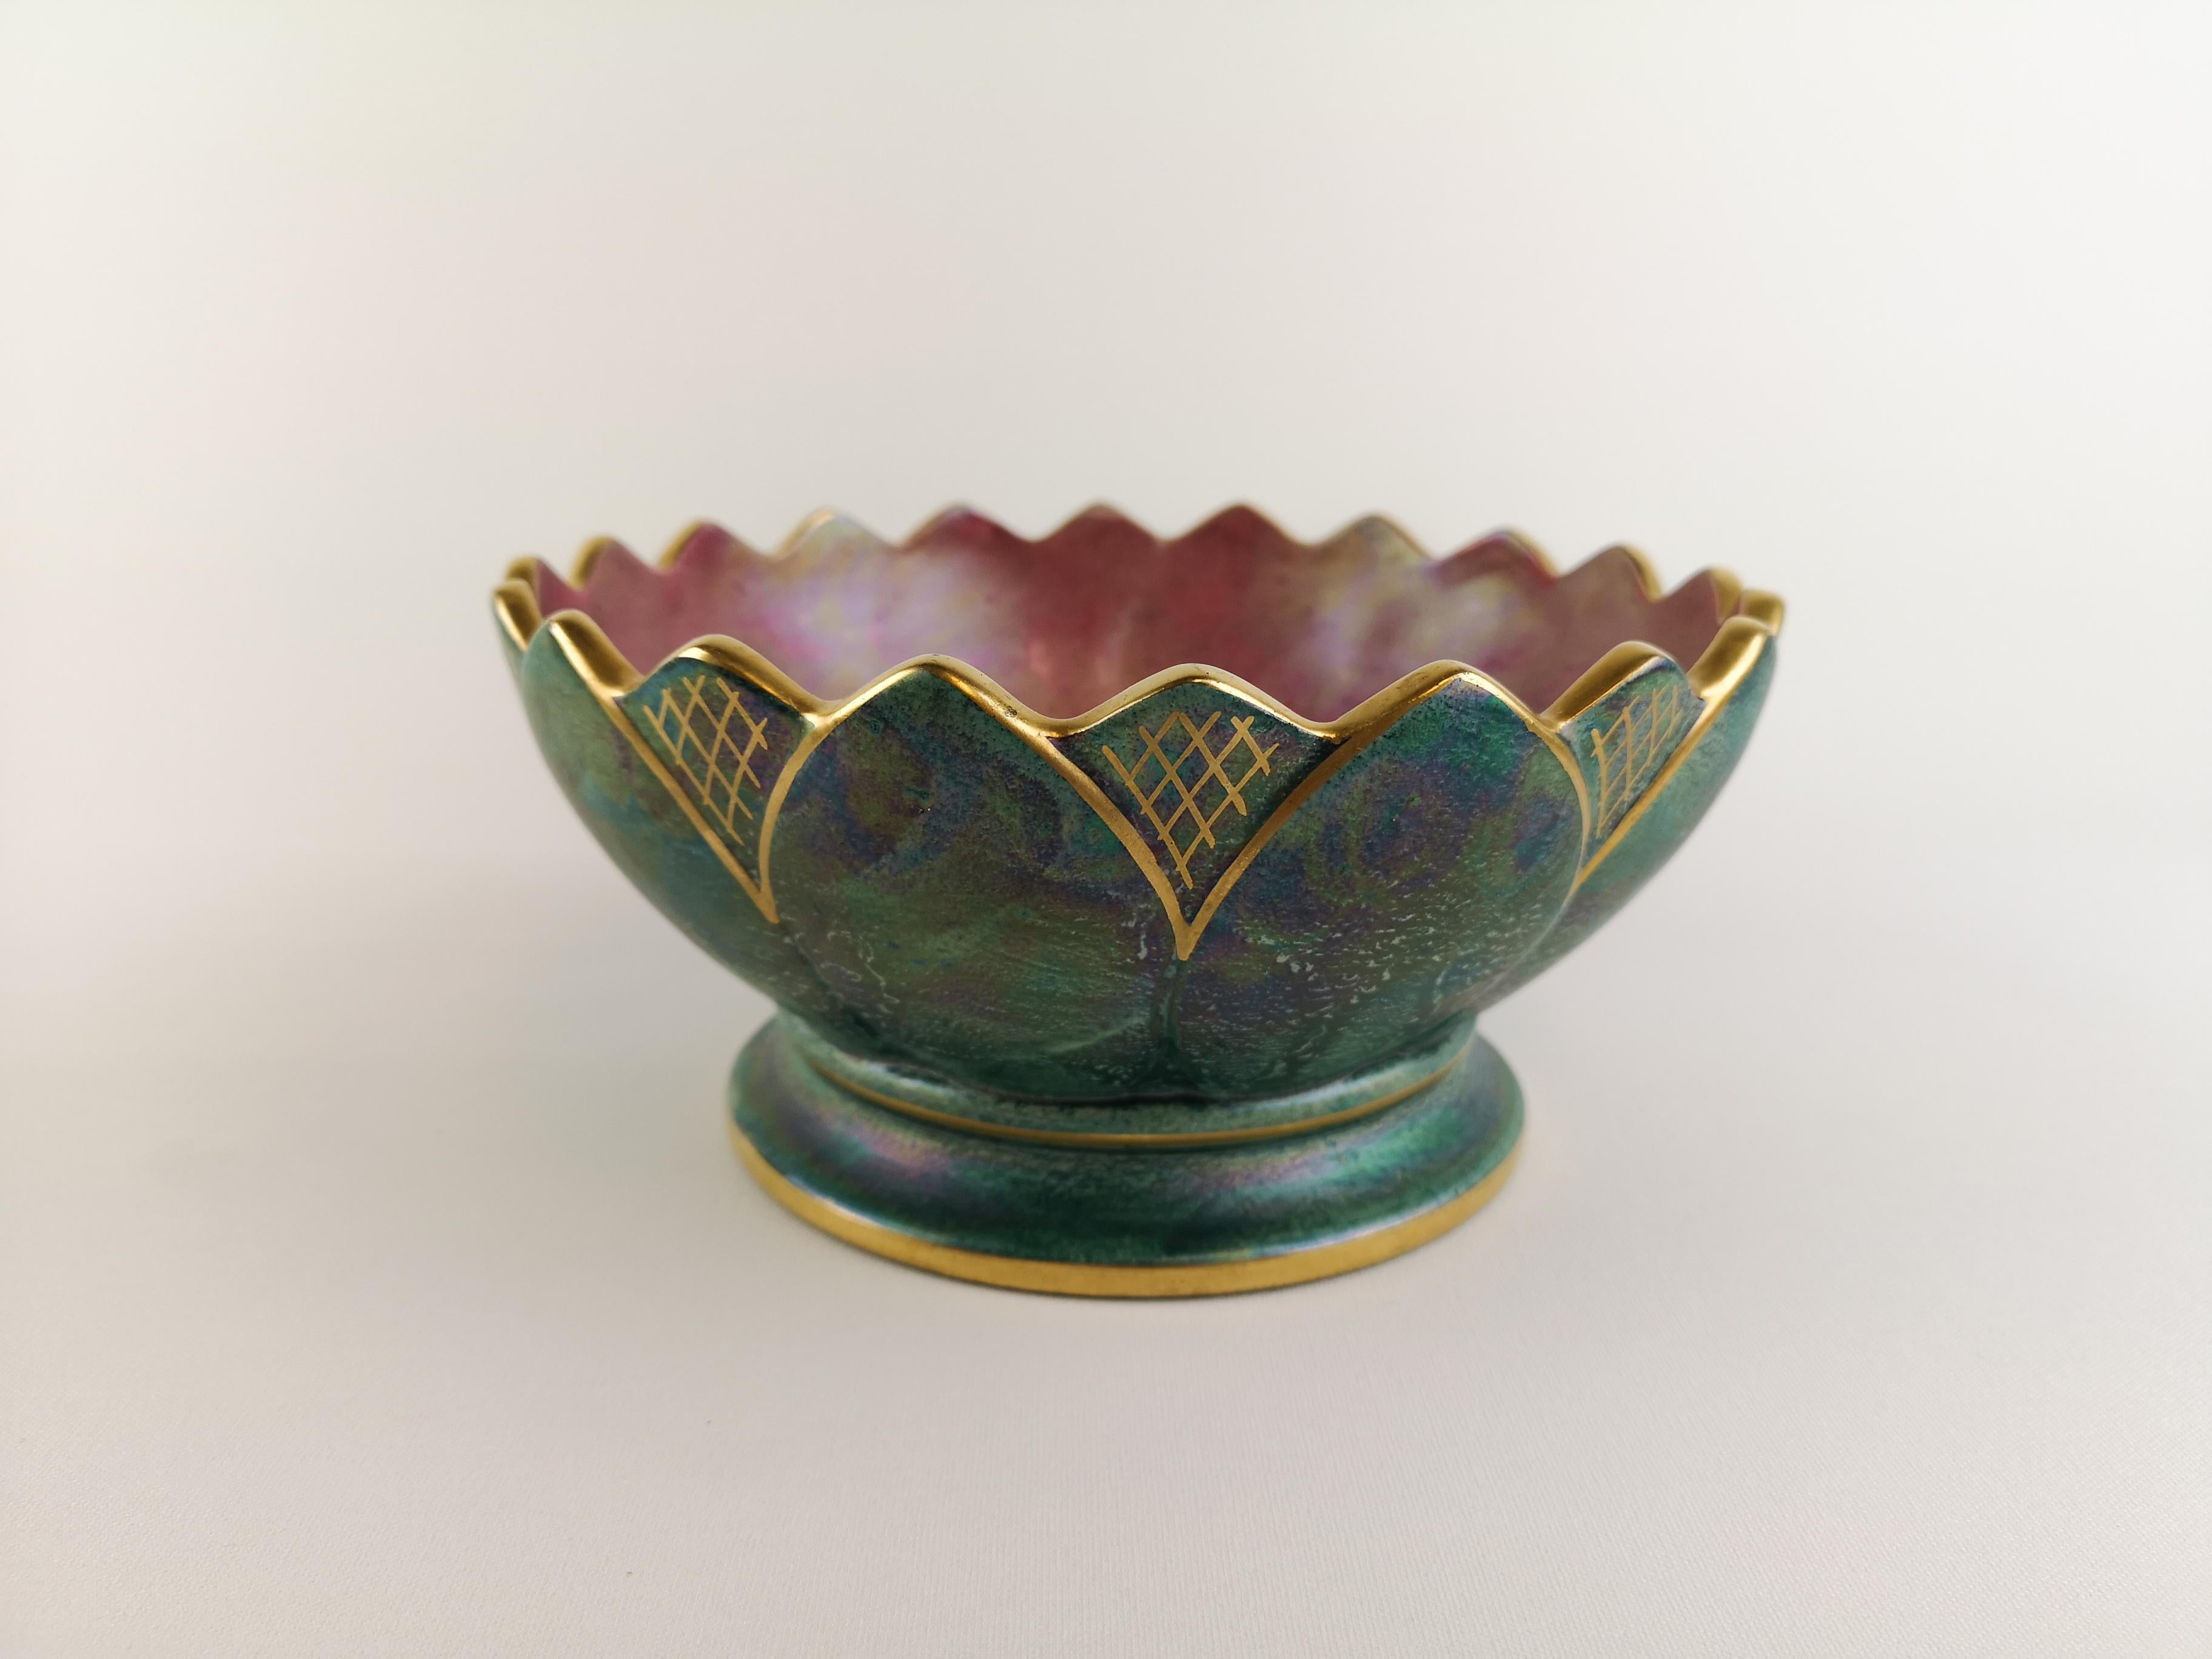 A wonderful bowl created by Josef Ekberg and manufactured by Gustavsberg Sweden in 1920s. Wonderful green glaze with hand painted gold pattern on the bowl. 

Excellent condition.